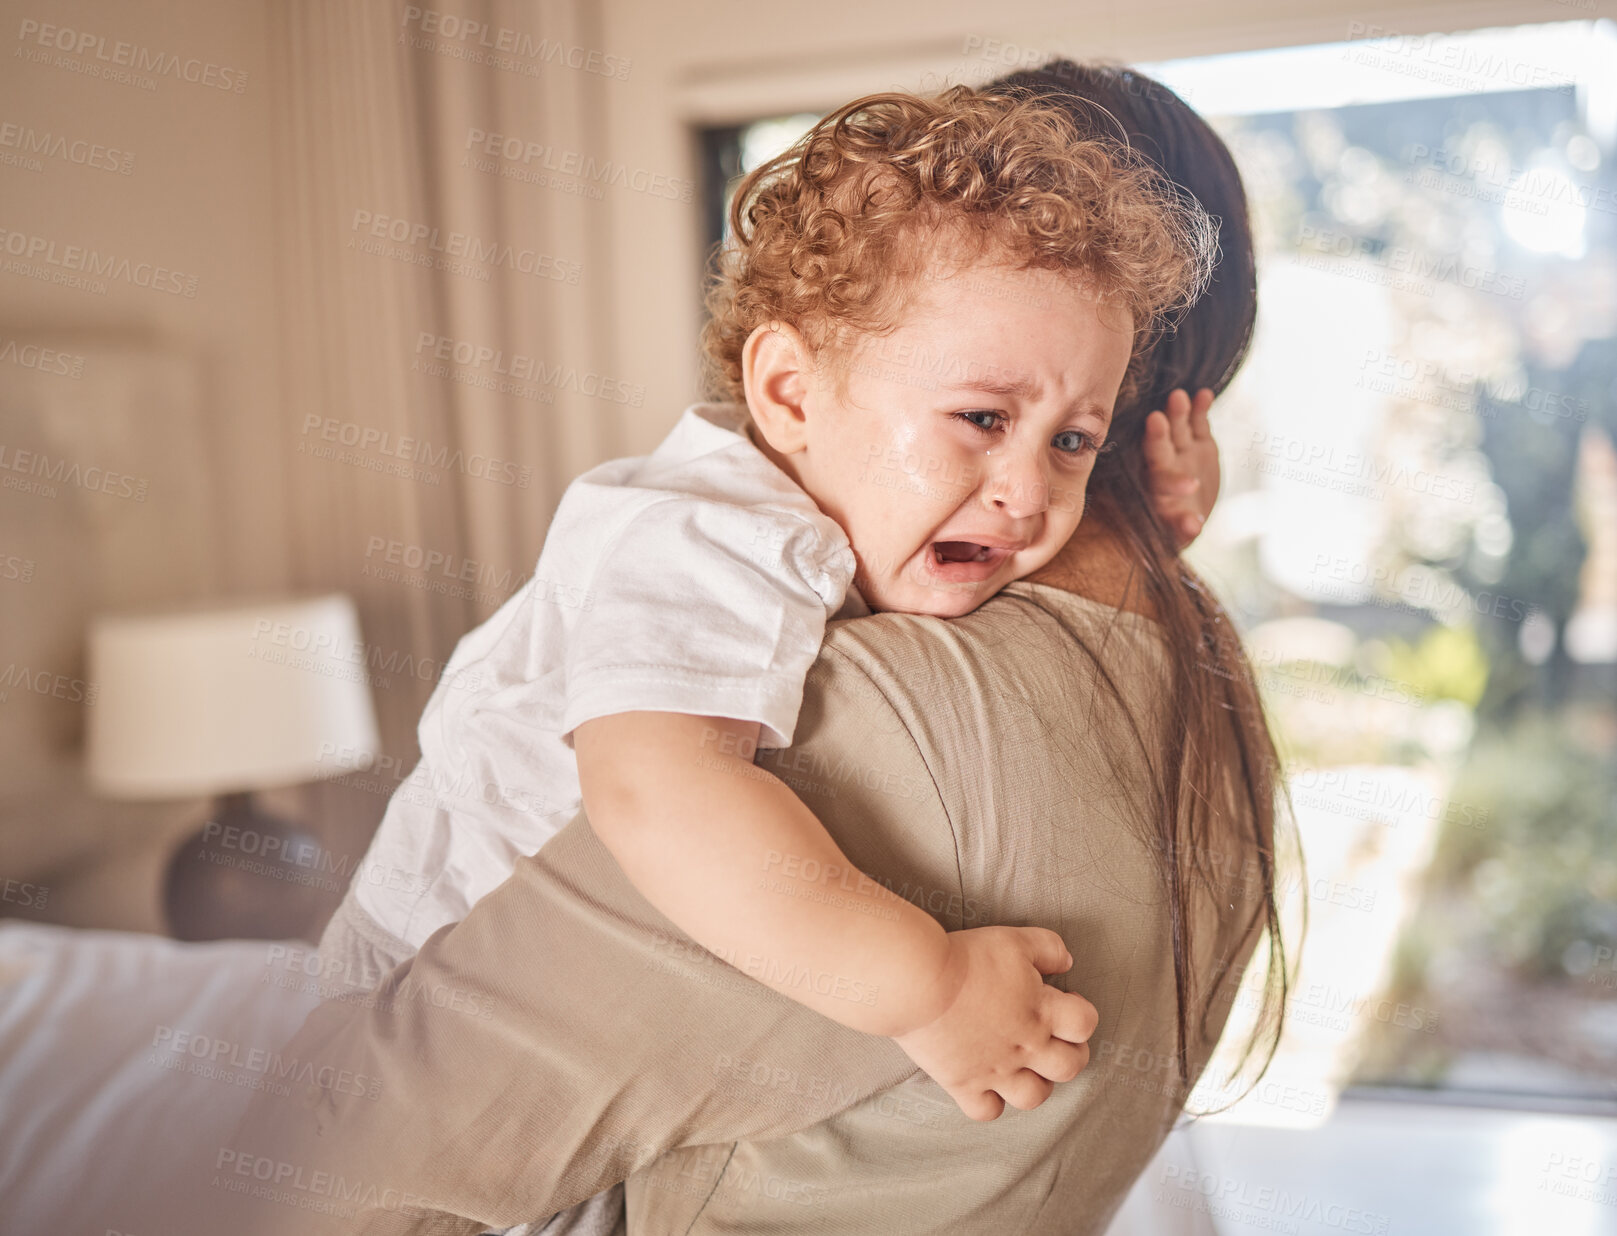 Buy stock photo Crying, sad and tears of baby with mom for comfort, safety and attention while hungry, upset or tired in a family home. Toddler boy child cry while in arms of caring woman babysitter, mother or nanny